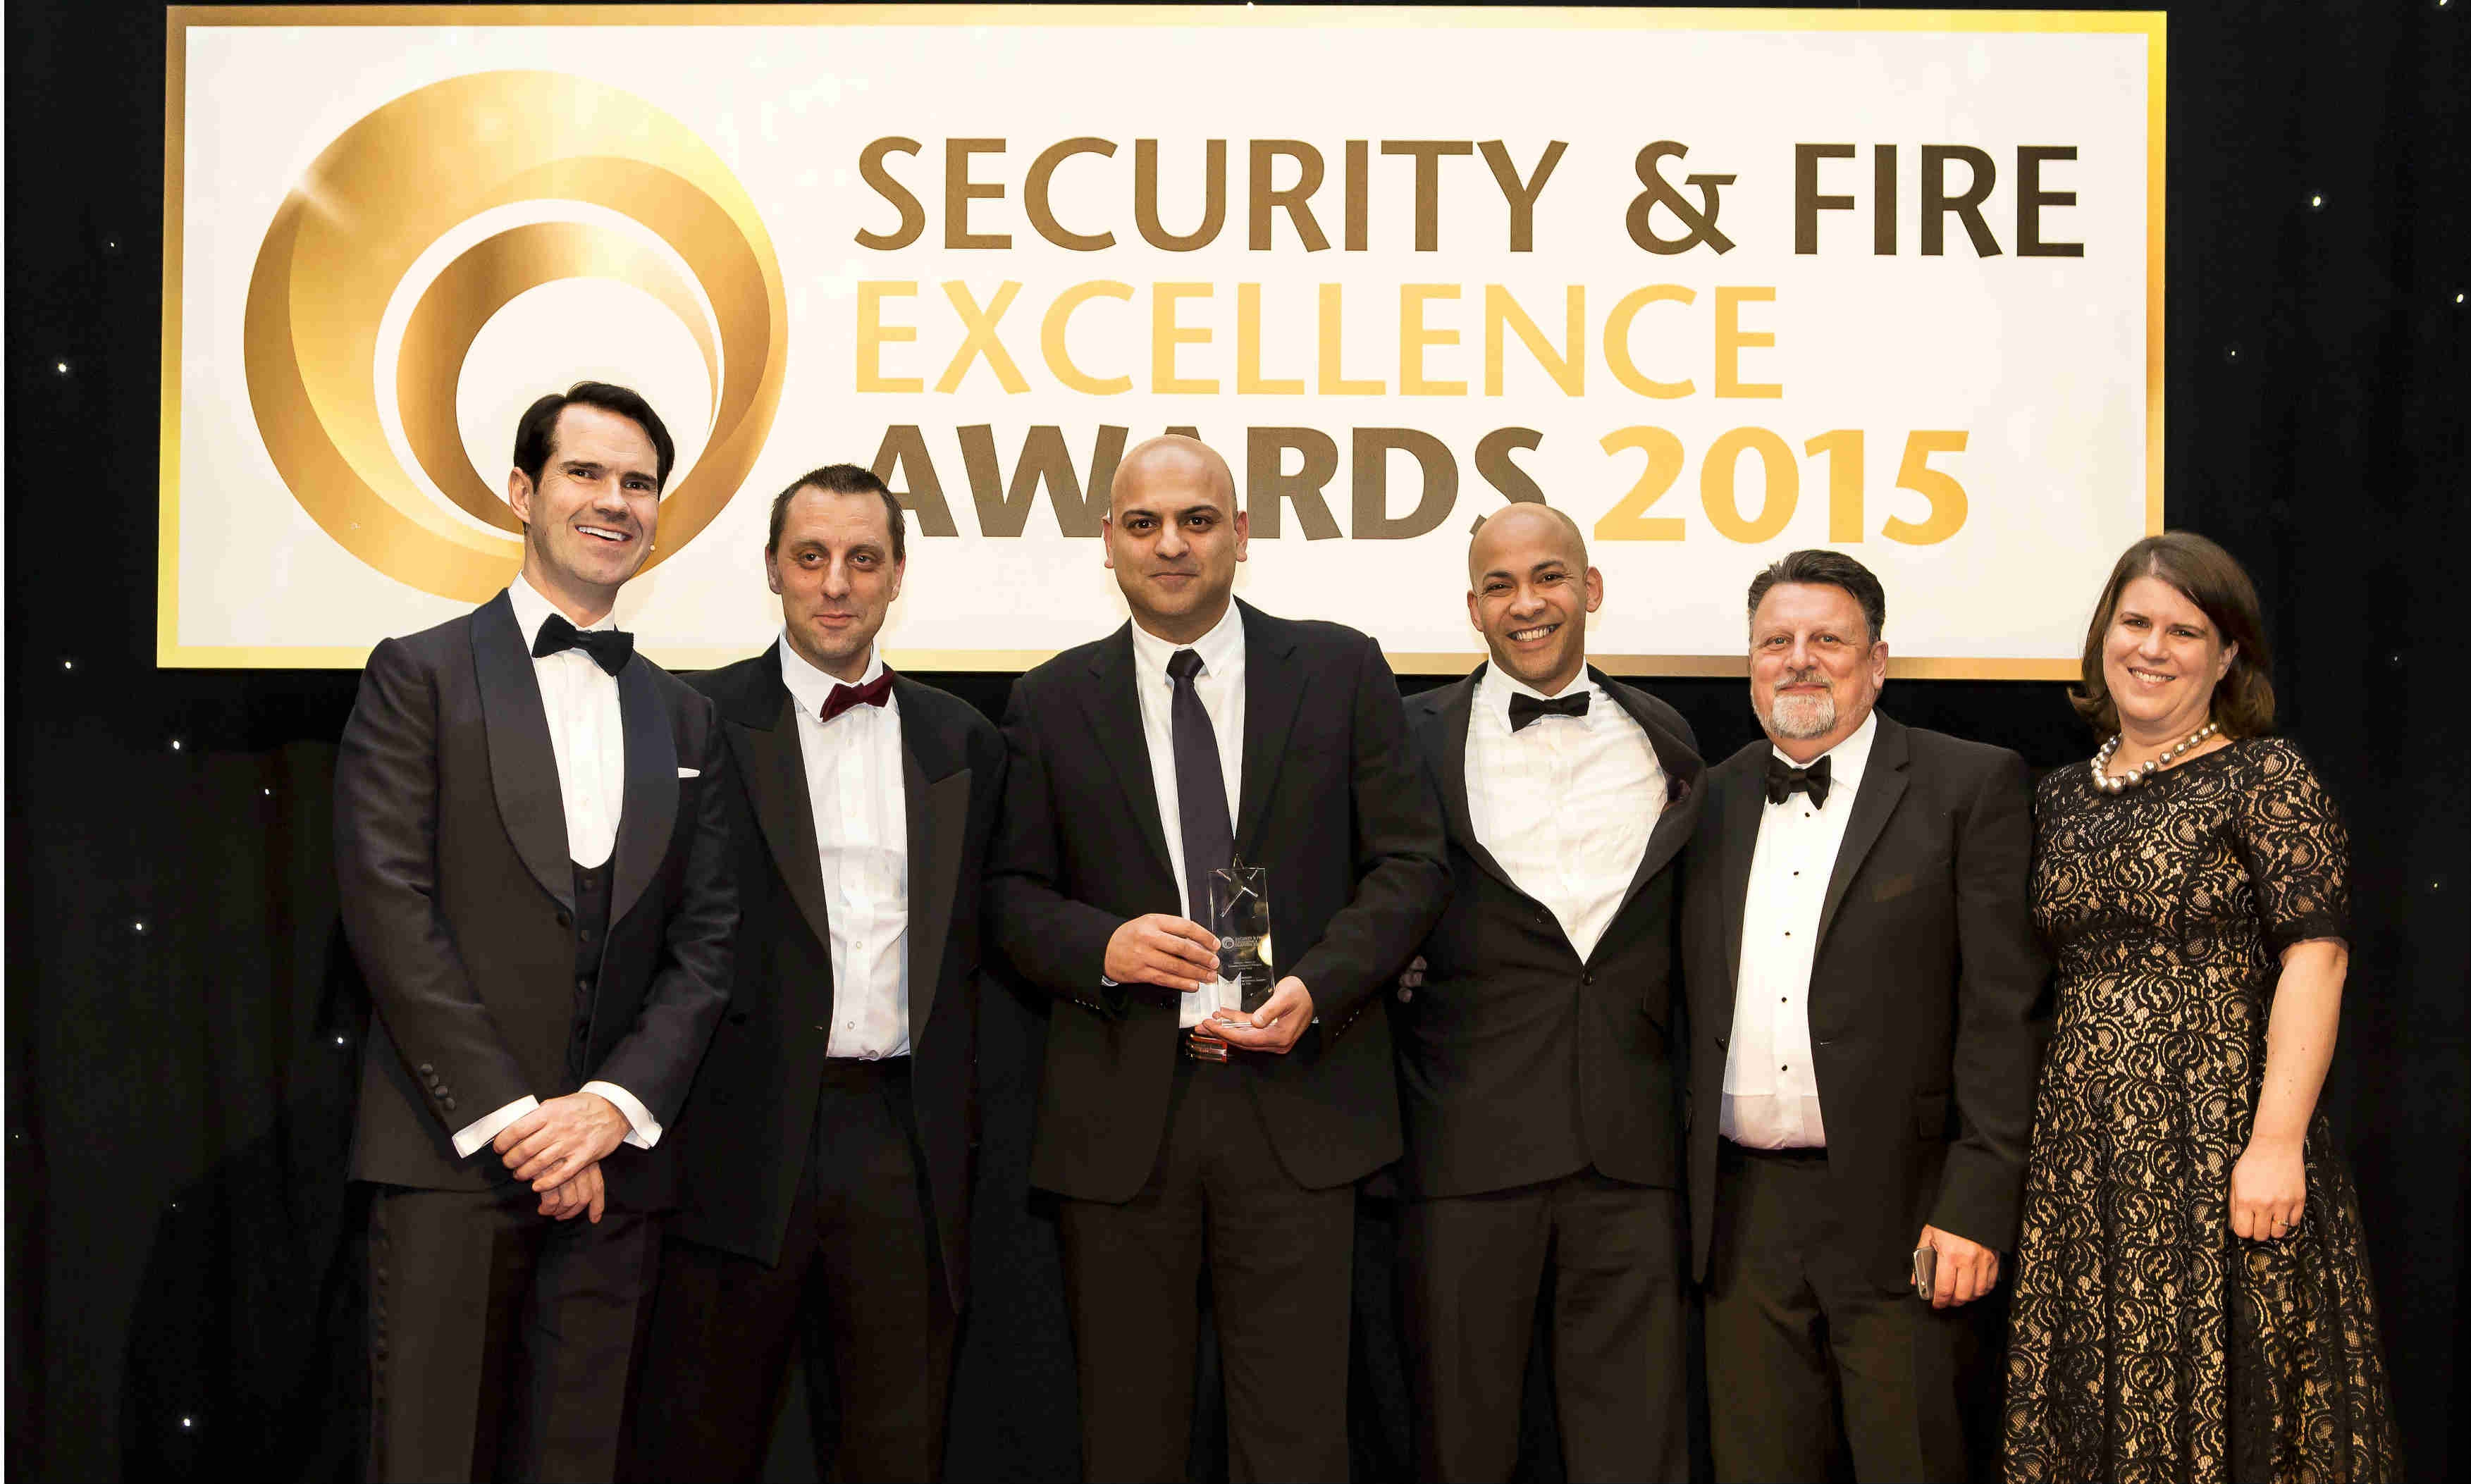 Paul Singh, Y3K’s Group CEO, accepts the award alongside Jimmy Carr at this year’s Security & Fire Excellence Awards